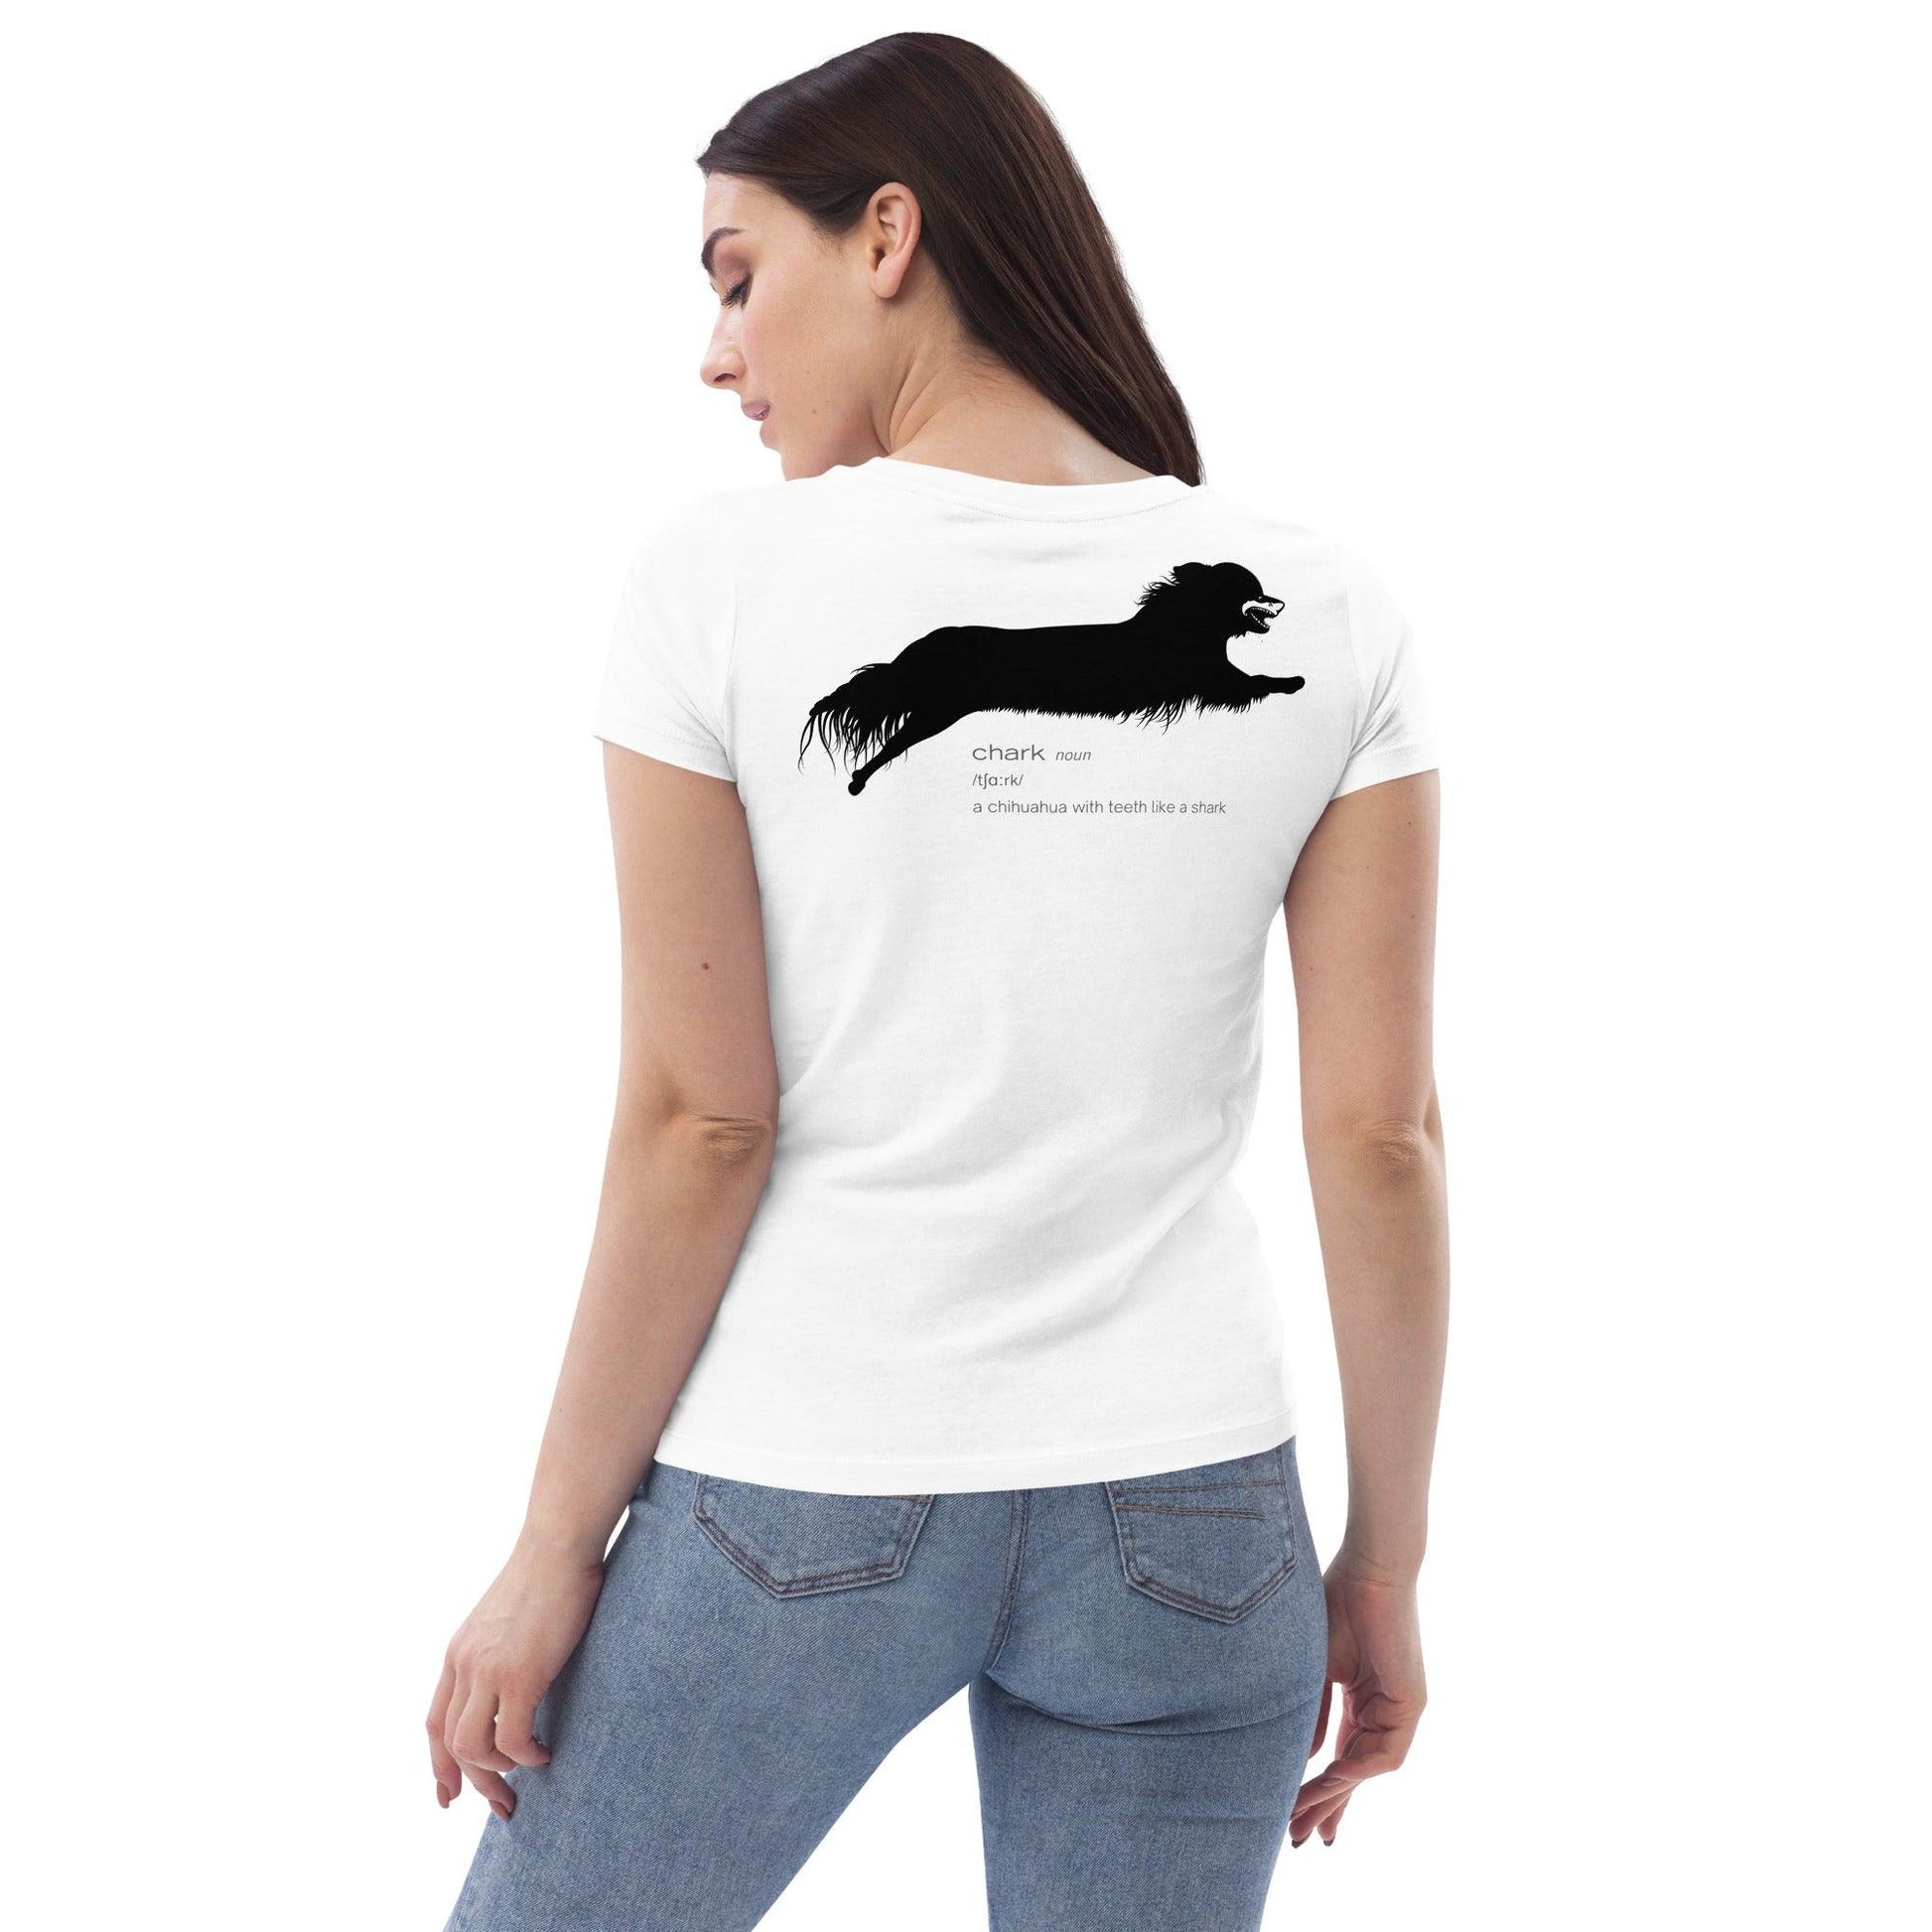 Chihuahua + Shark = Chark women's fitted t-shirt. Front: black silhouette of a longhaired chihuahua with the face of a great white shark + "Chark" in cursive font. Back: another shark-faced chihuahua silhouette running across the shoulder blades + dictionary entry of the noun "chark": a chihuahua with teeth like a shark. 100% pure organic cotton. White or light grey. Design by Renate Kriegler, owner of Chimigos - for the love of chihuahuas. More on chimigos.com